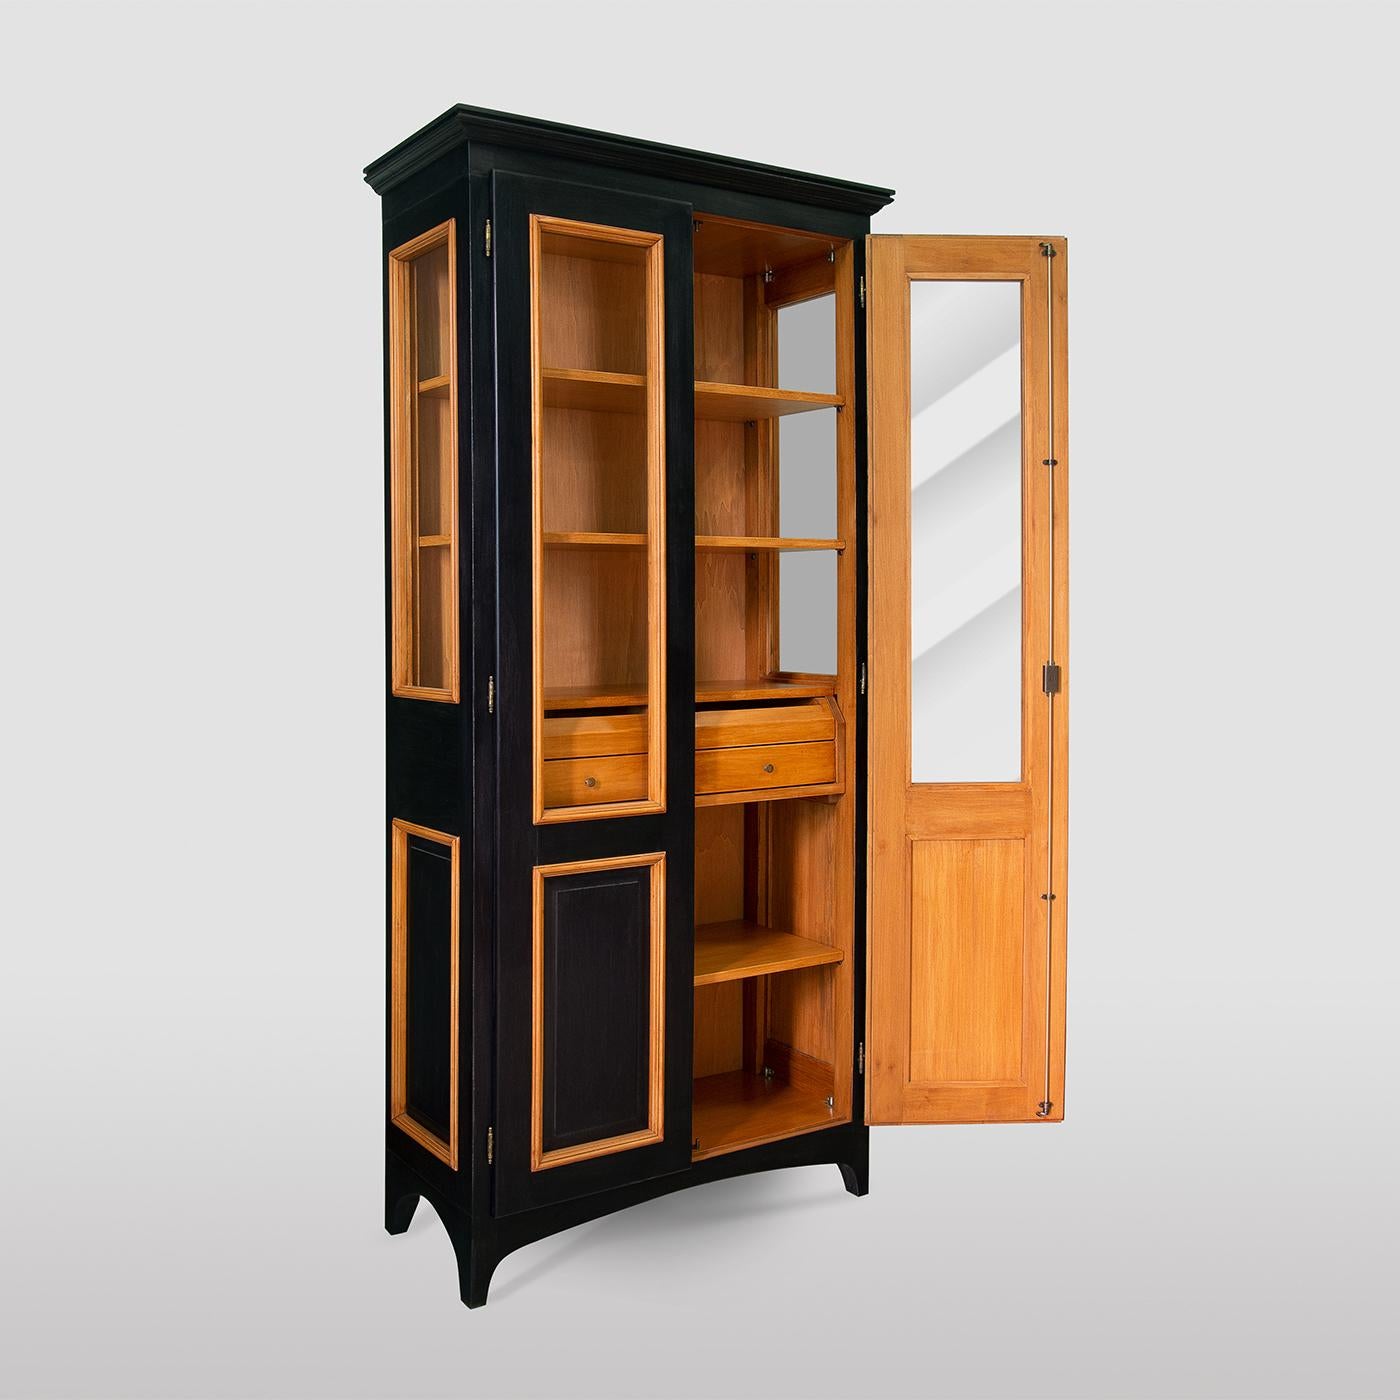 Superbly crafted by Italian artisans with a lime wood structure, this display cabinet brings a classic statement into a modern home, creating a truly sophisticated statement. The rich walnut stain of the sober and sturdy silhouette is highlighted by